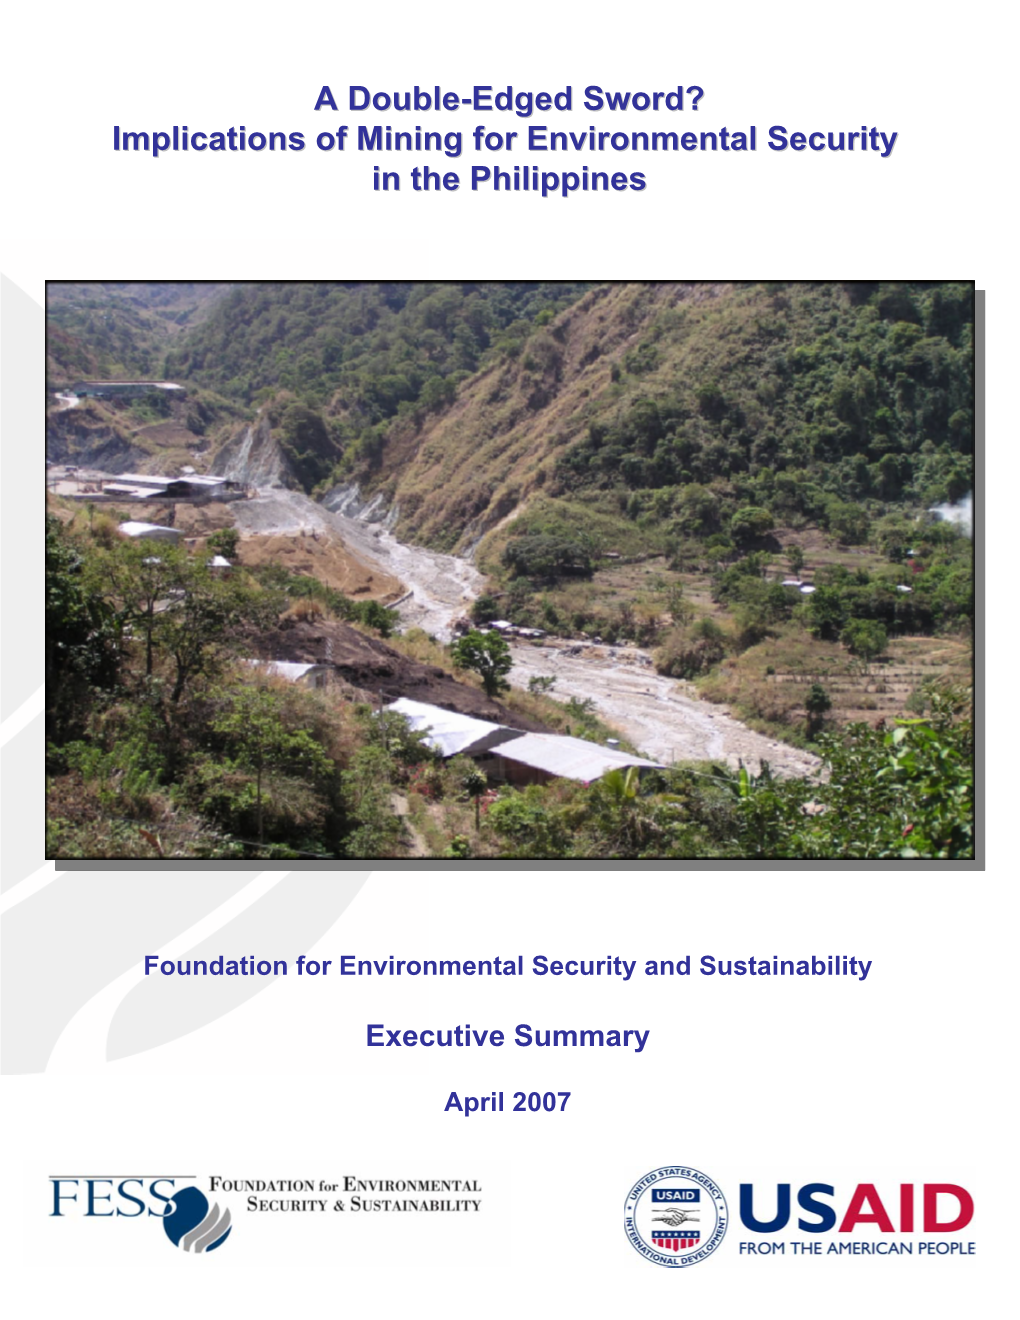 Implications of Mining for Environmental Security in the Philippines